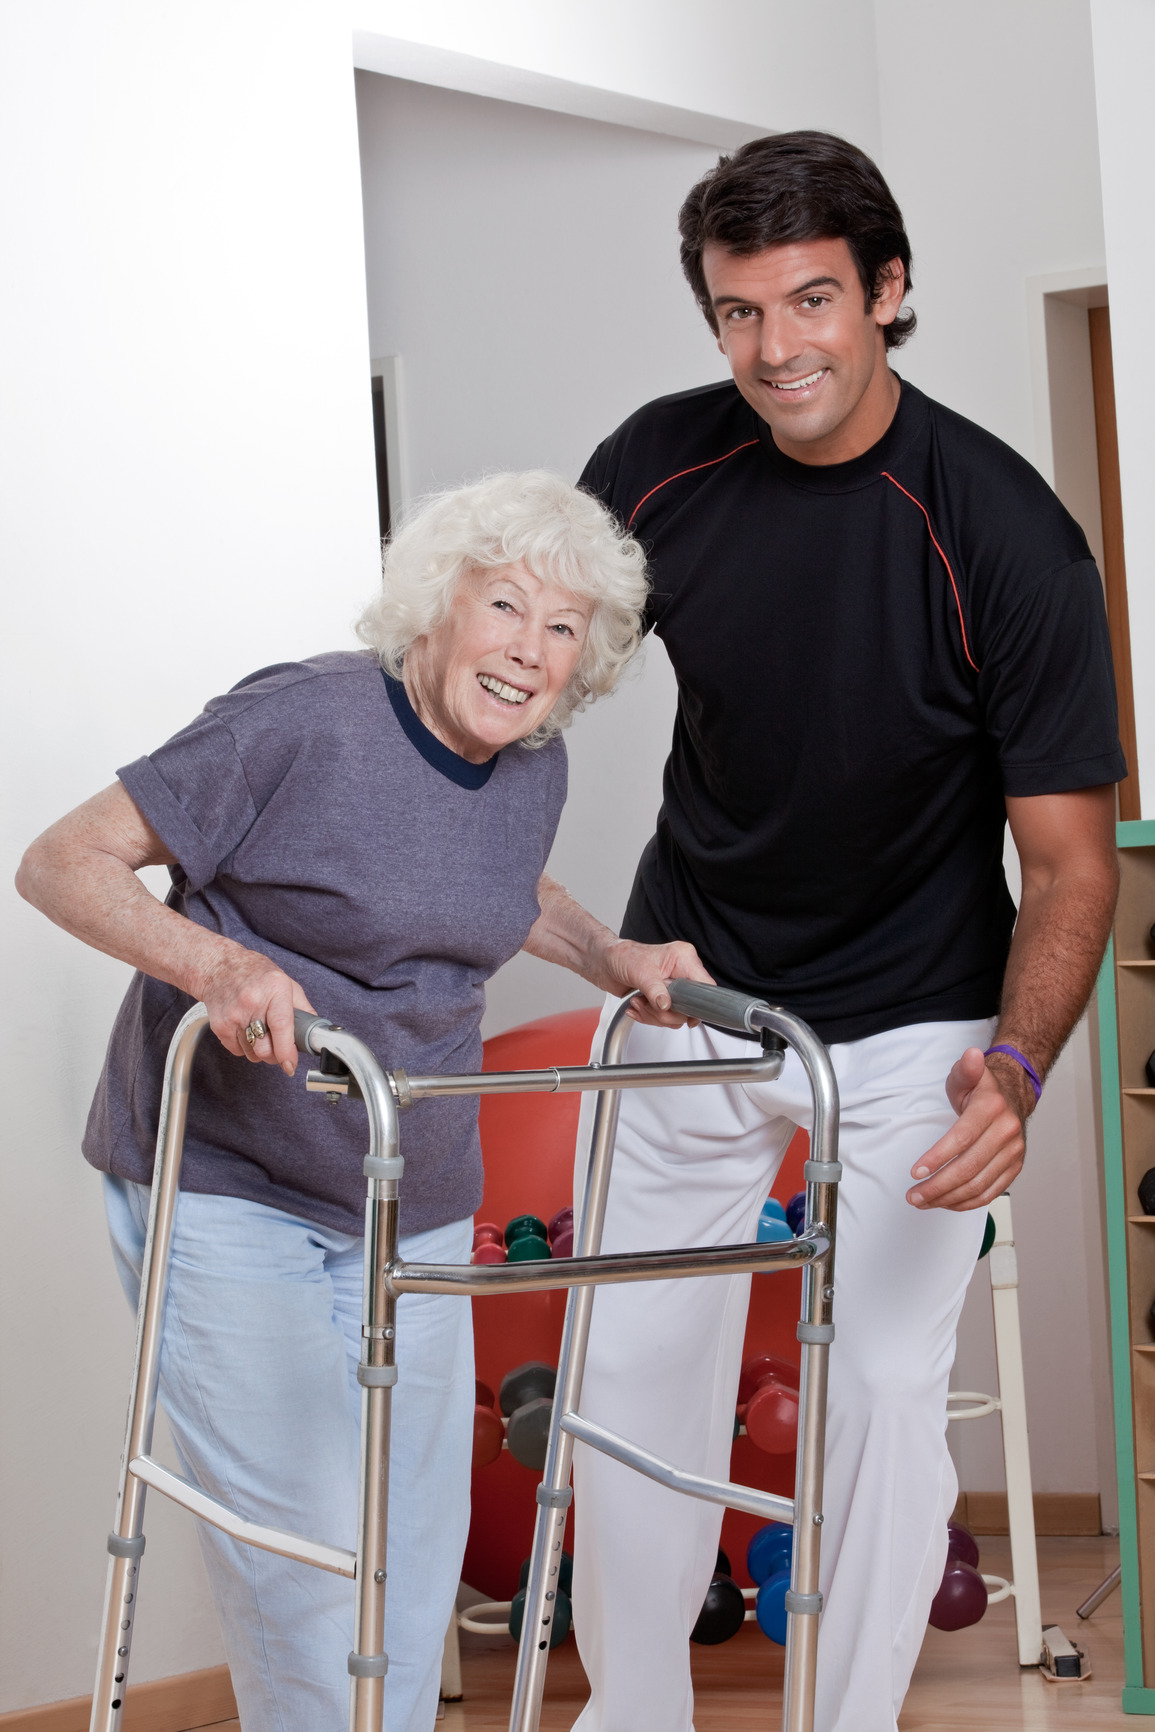 Therepaist helping patient with a walker